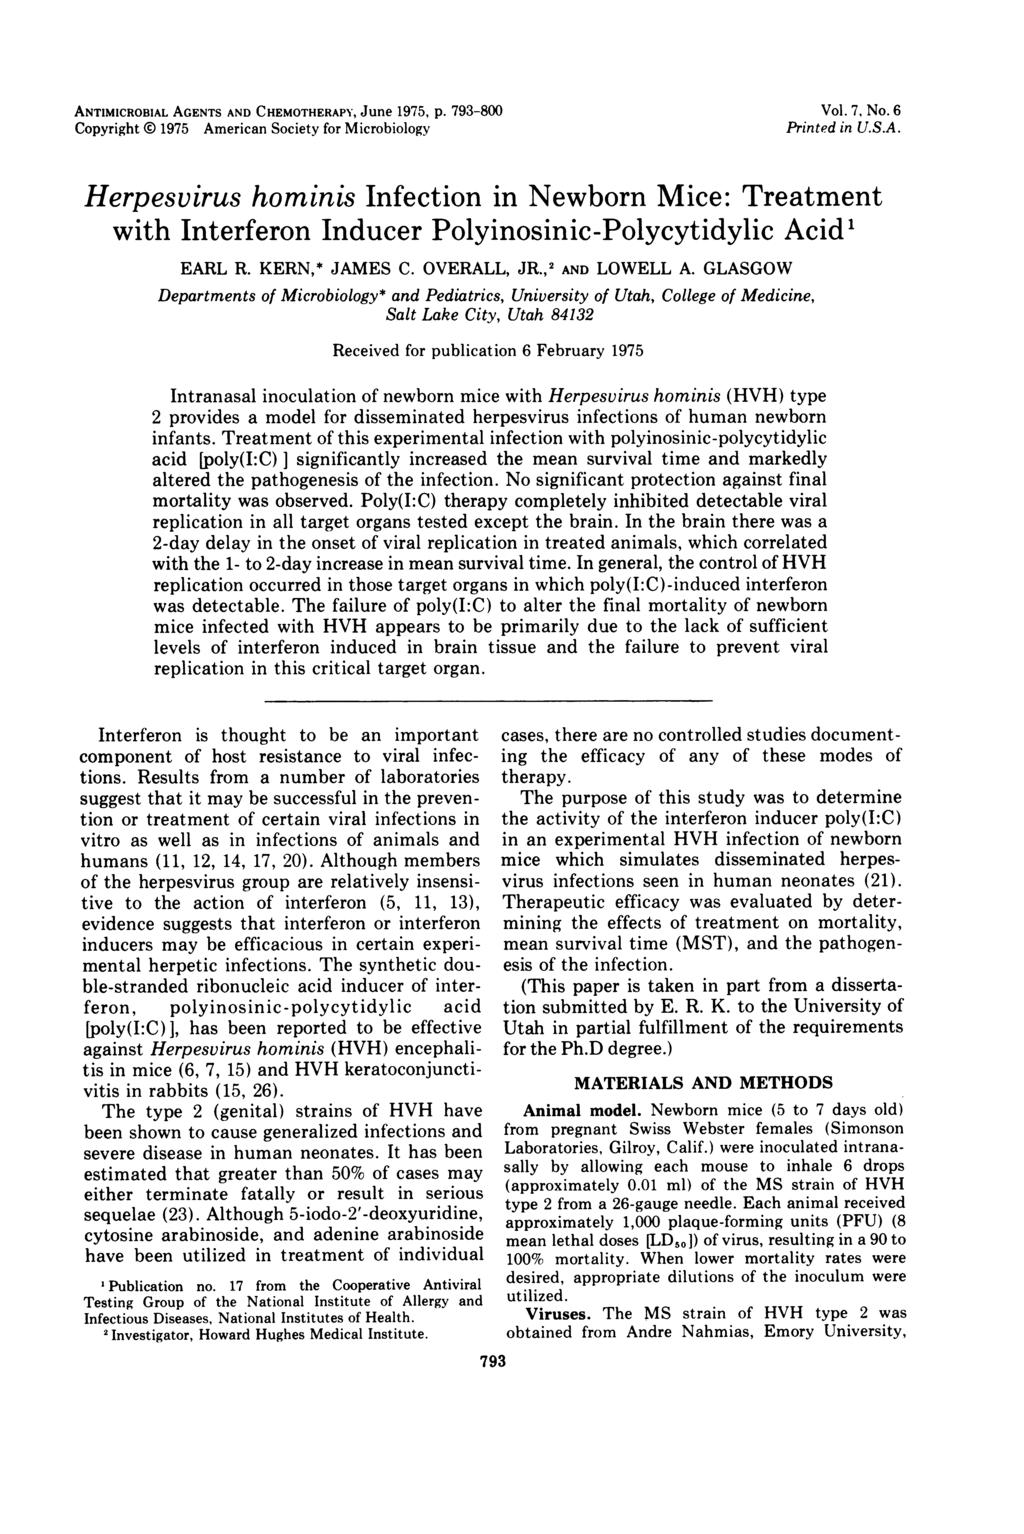 ANTIMICROBIAL AGENTS AND CHEMOTHERAPY, June 1975, p. 793-800 Copyright ( 1975 American Society for Microbiology Vol. 7, No. 6 Printed in U.S.A. Herpesvirus hominis Infection in Newborn Mice: Treatment with Interferon Inducer Polyinosinic-Polycytidylic Acid' EARL R.